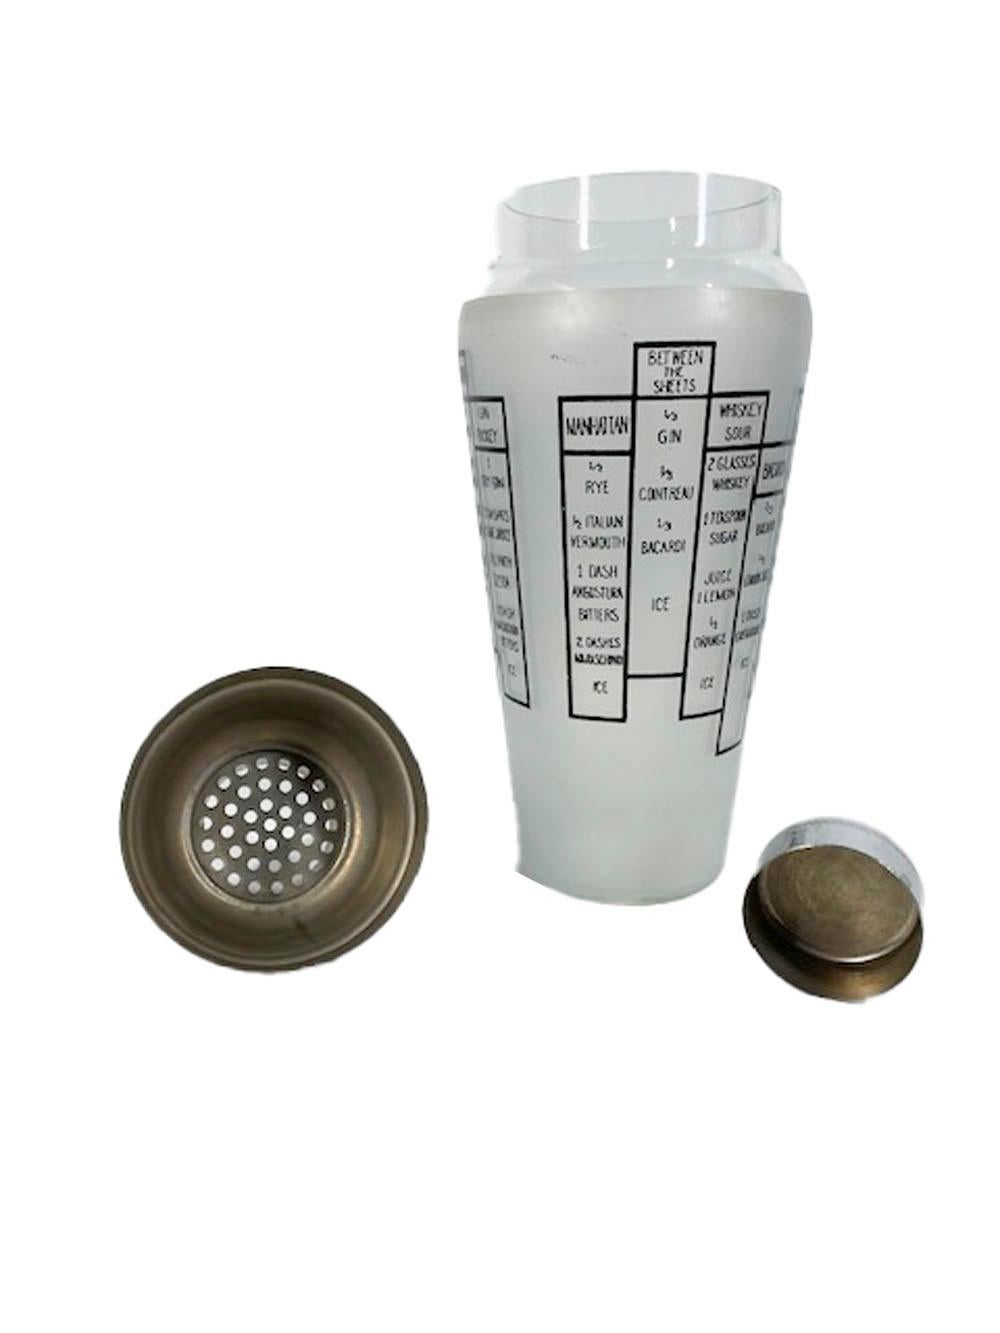 Art Deco recipe cocktail shaker with black graphics on frosted ground having 2 panels of 7 recipes and a domed chrome center pour lid with integral strainer.